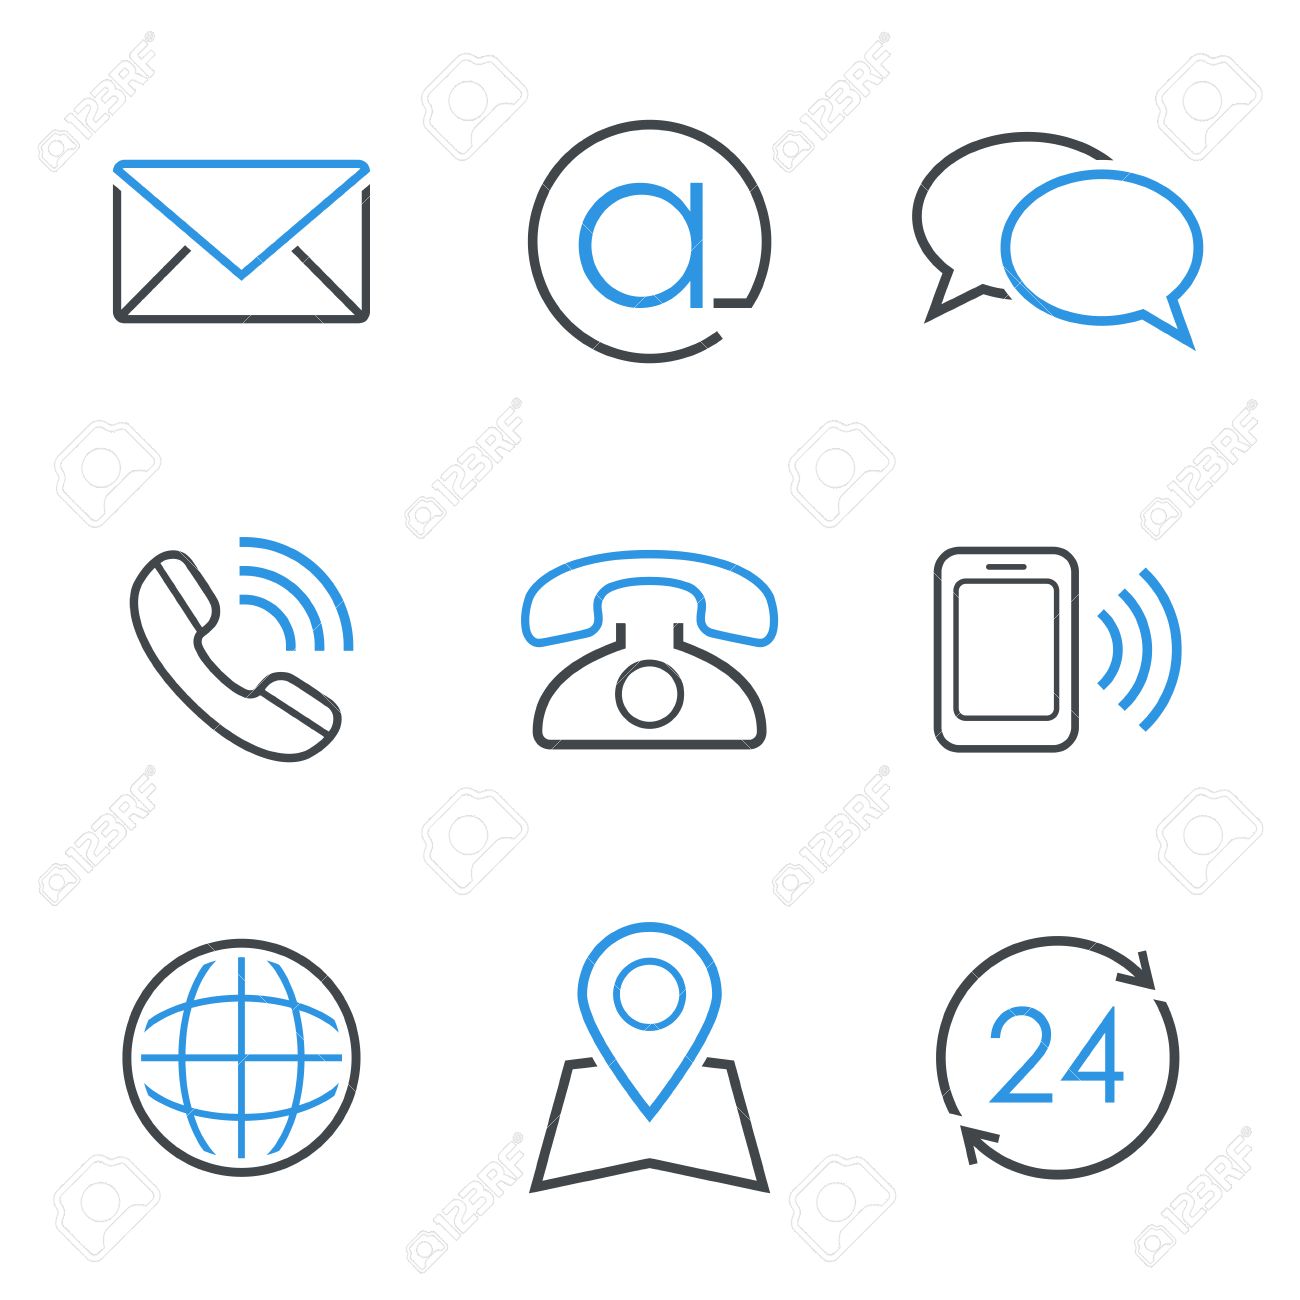 Set of numerous contact icons in flat silhouette style artwork 